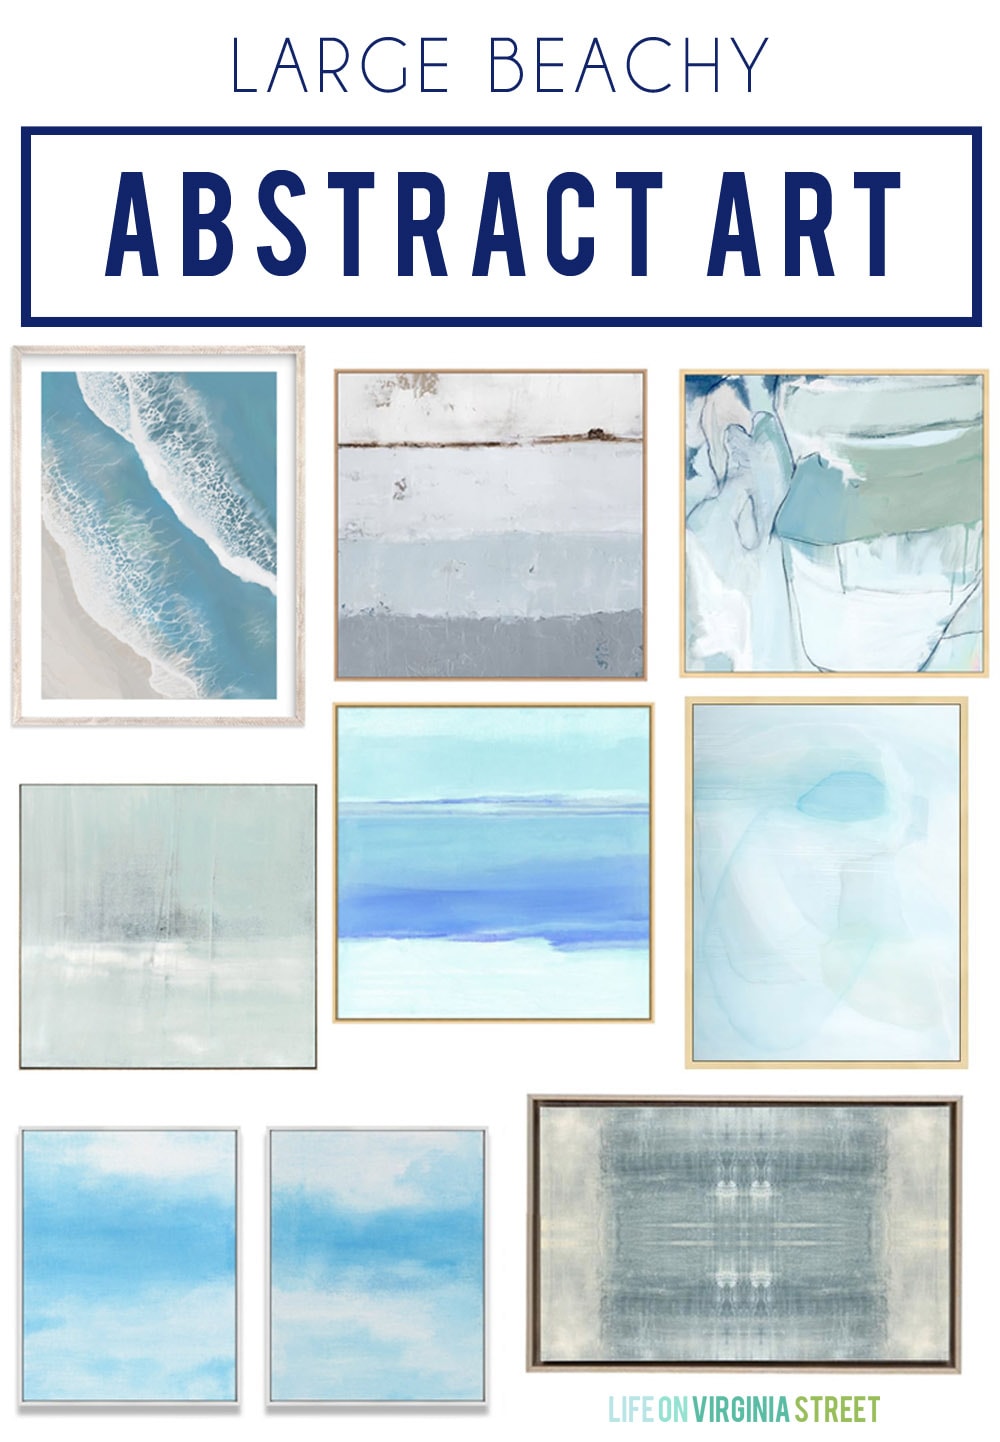 Large Beachy Abstract Art Ideas for the Office - Life On Virginia Street